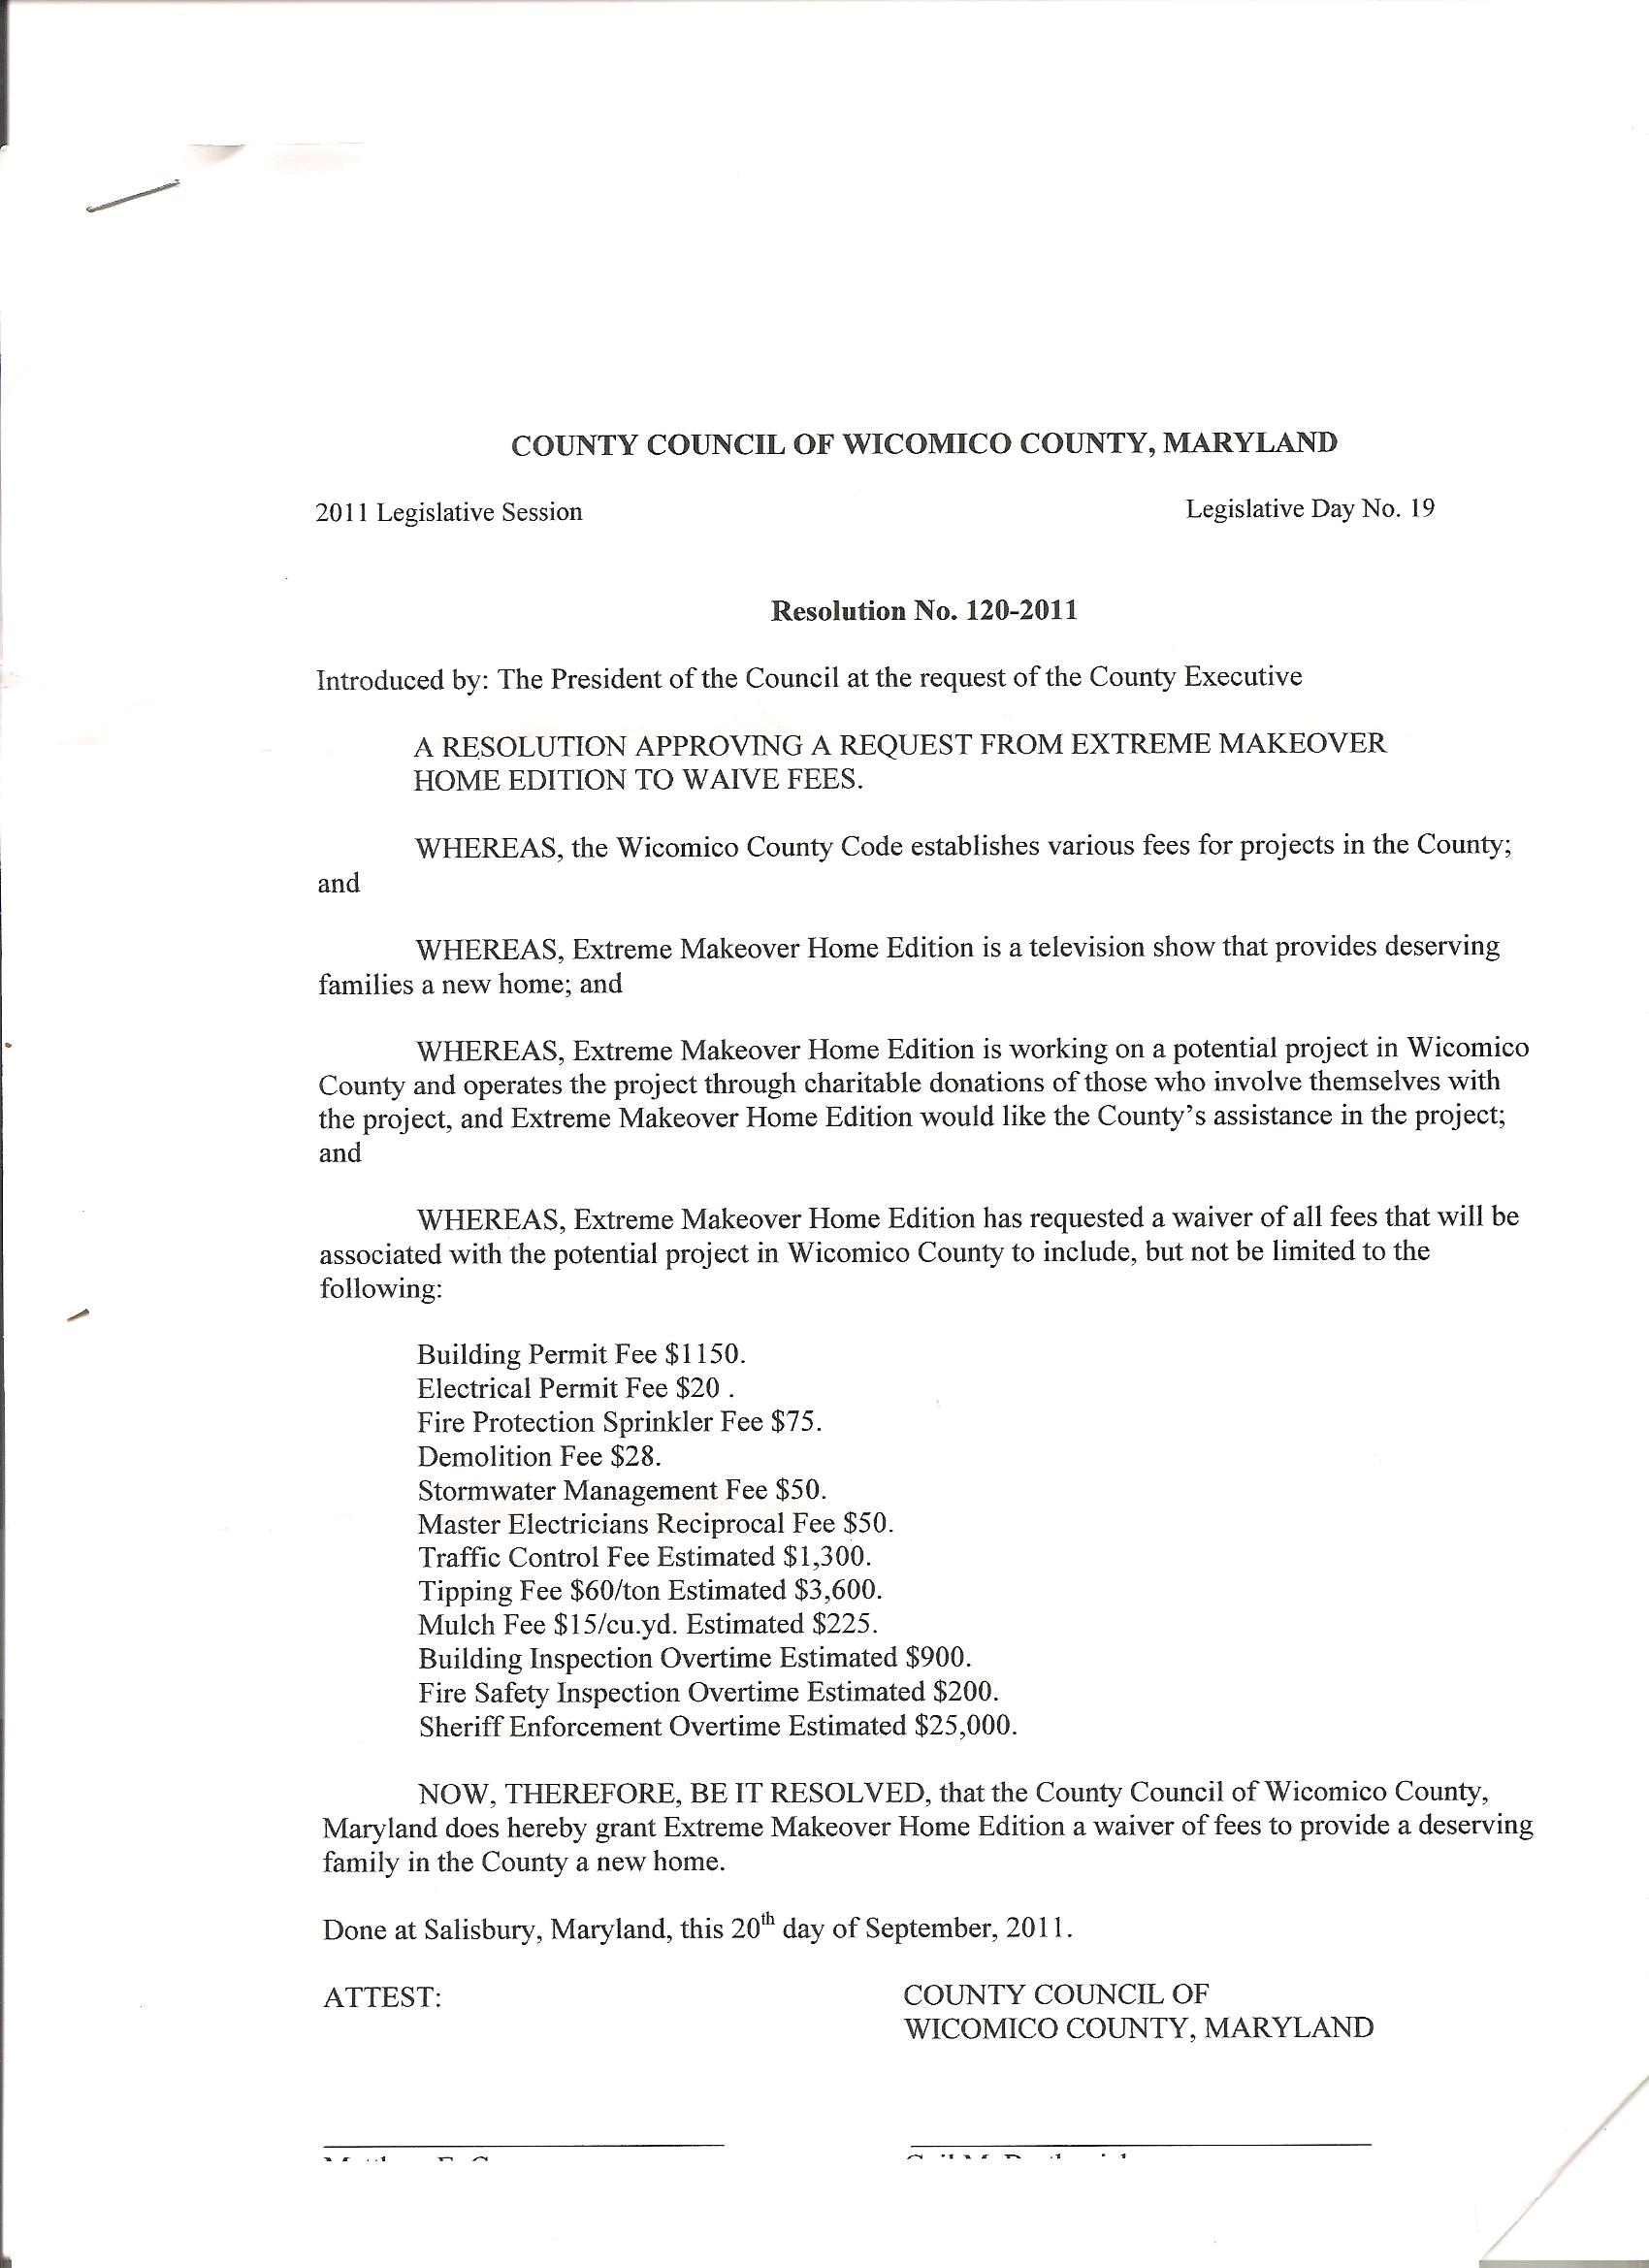 The county's resolution, provided by County Council member Bob Culver and forwarded to me by a concerned citizen.